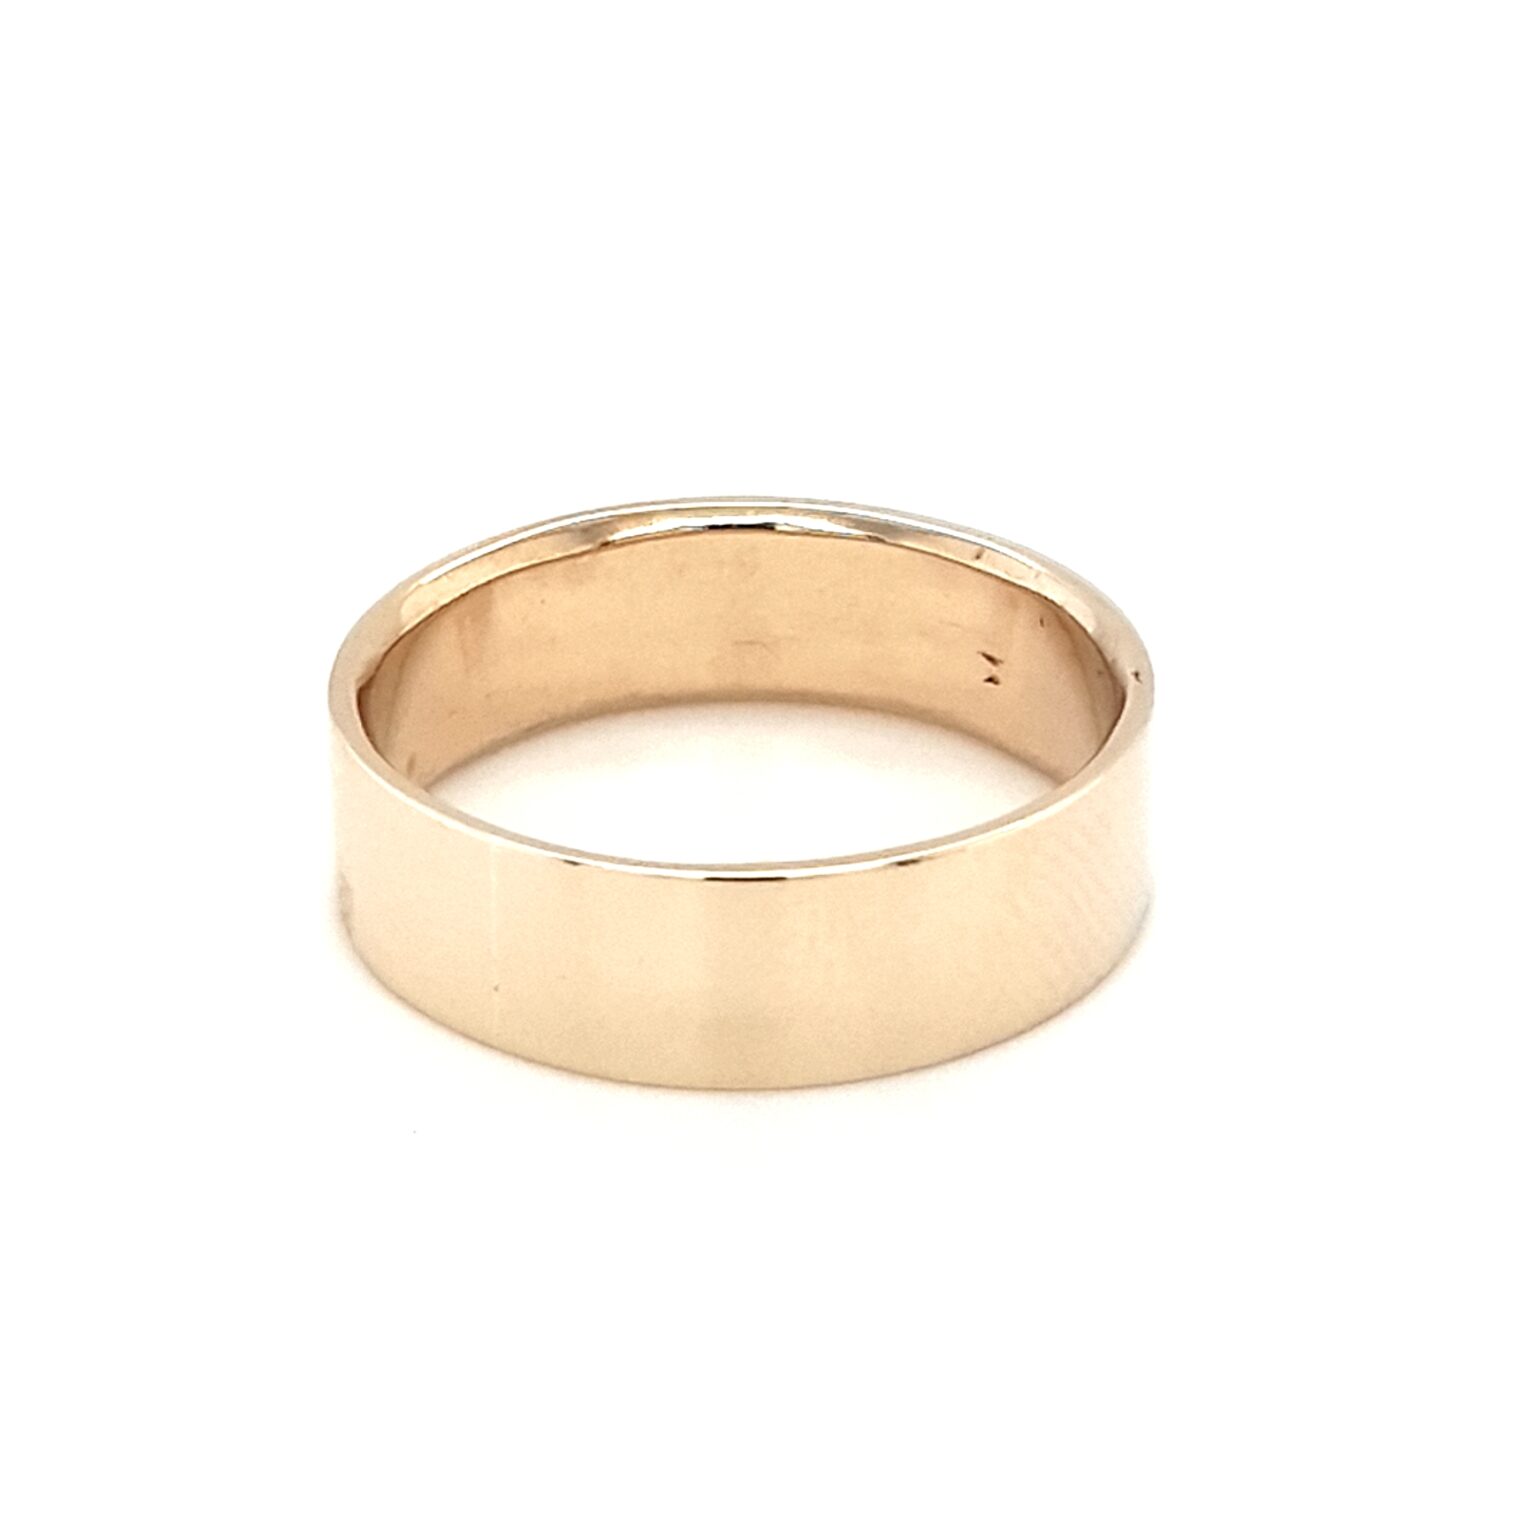 Leon Bakers 9k Yellow Gold Wedding Ring Size V_0